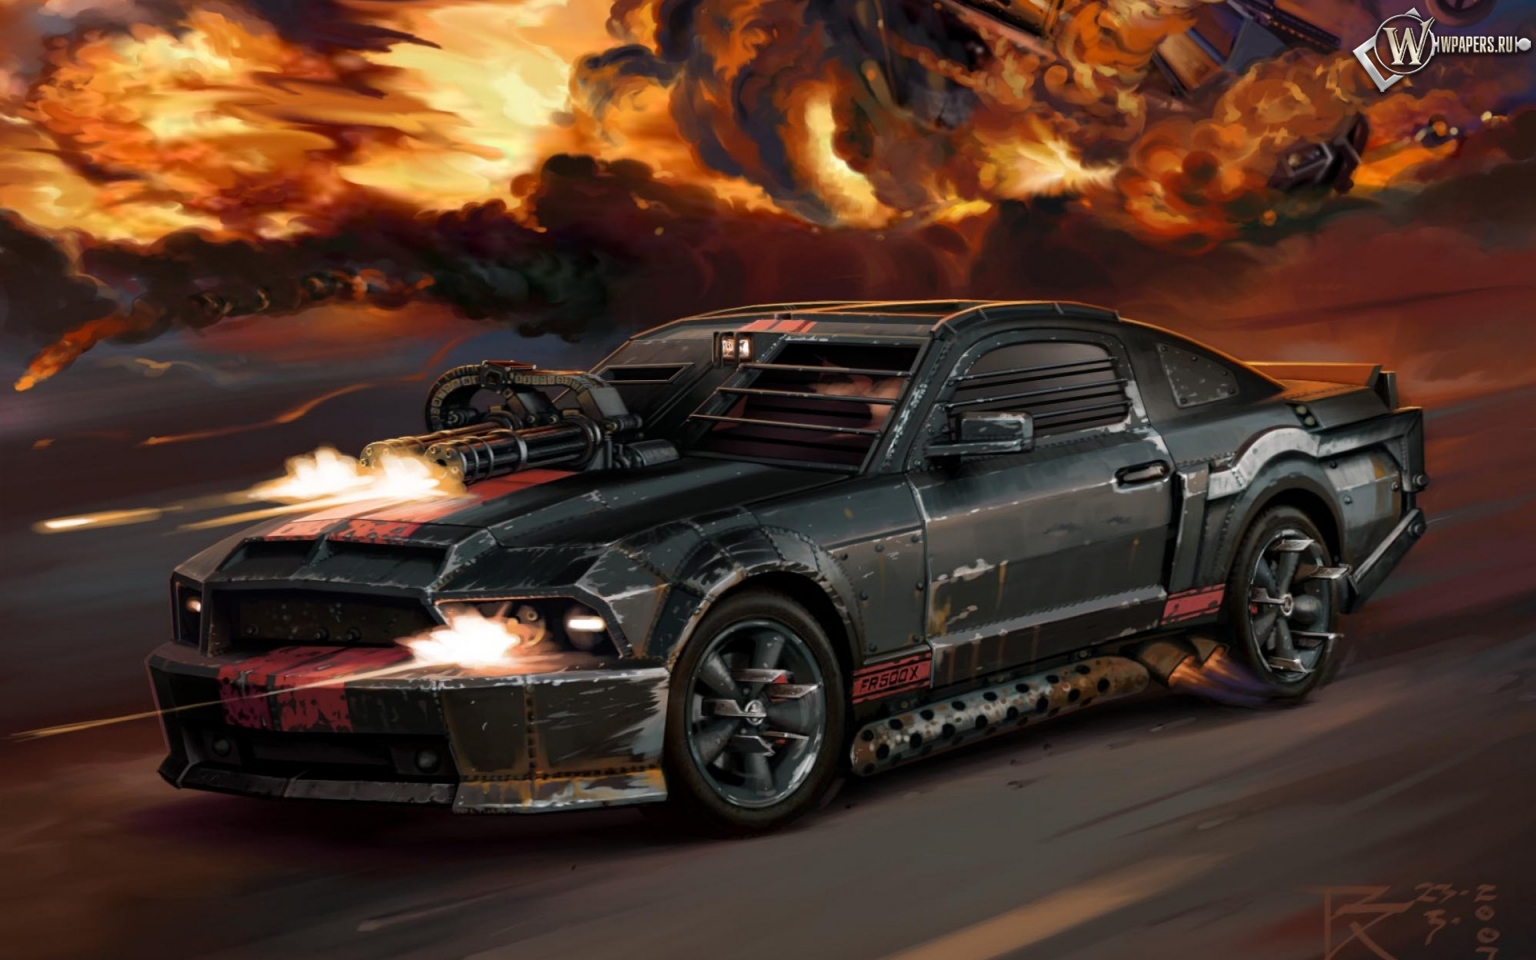 Car ford mustang death race 1536x960